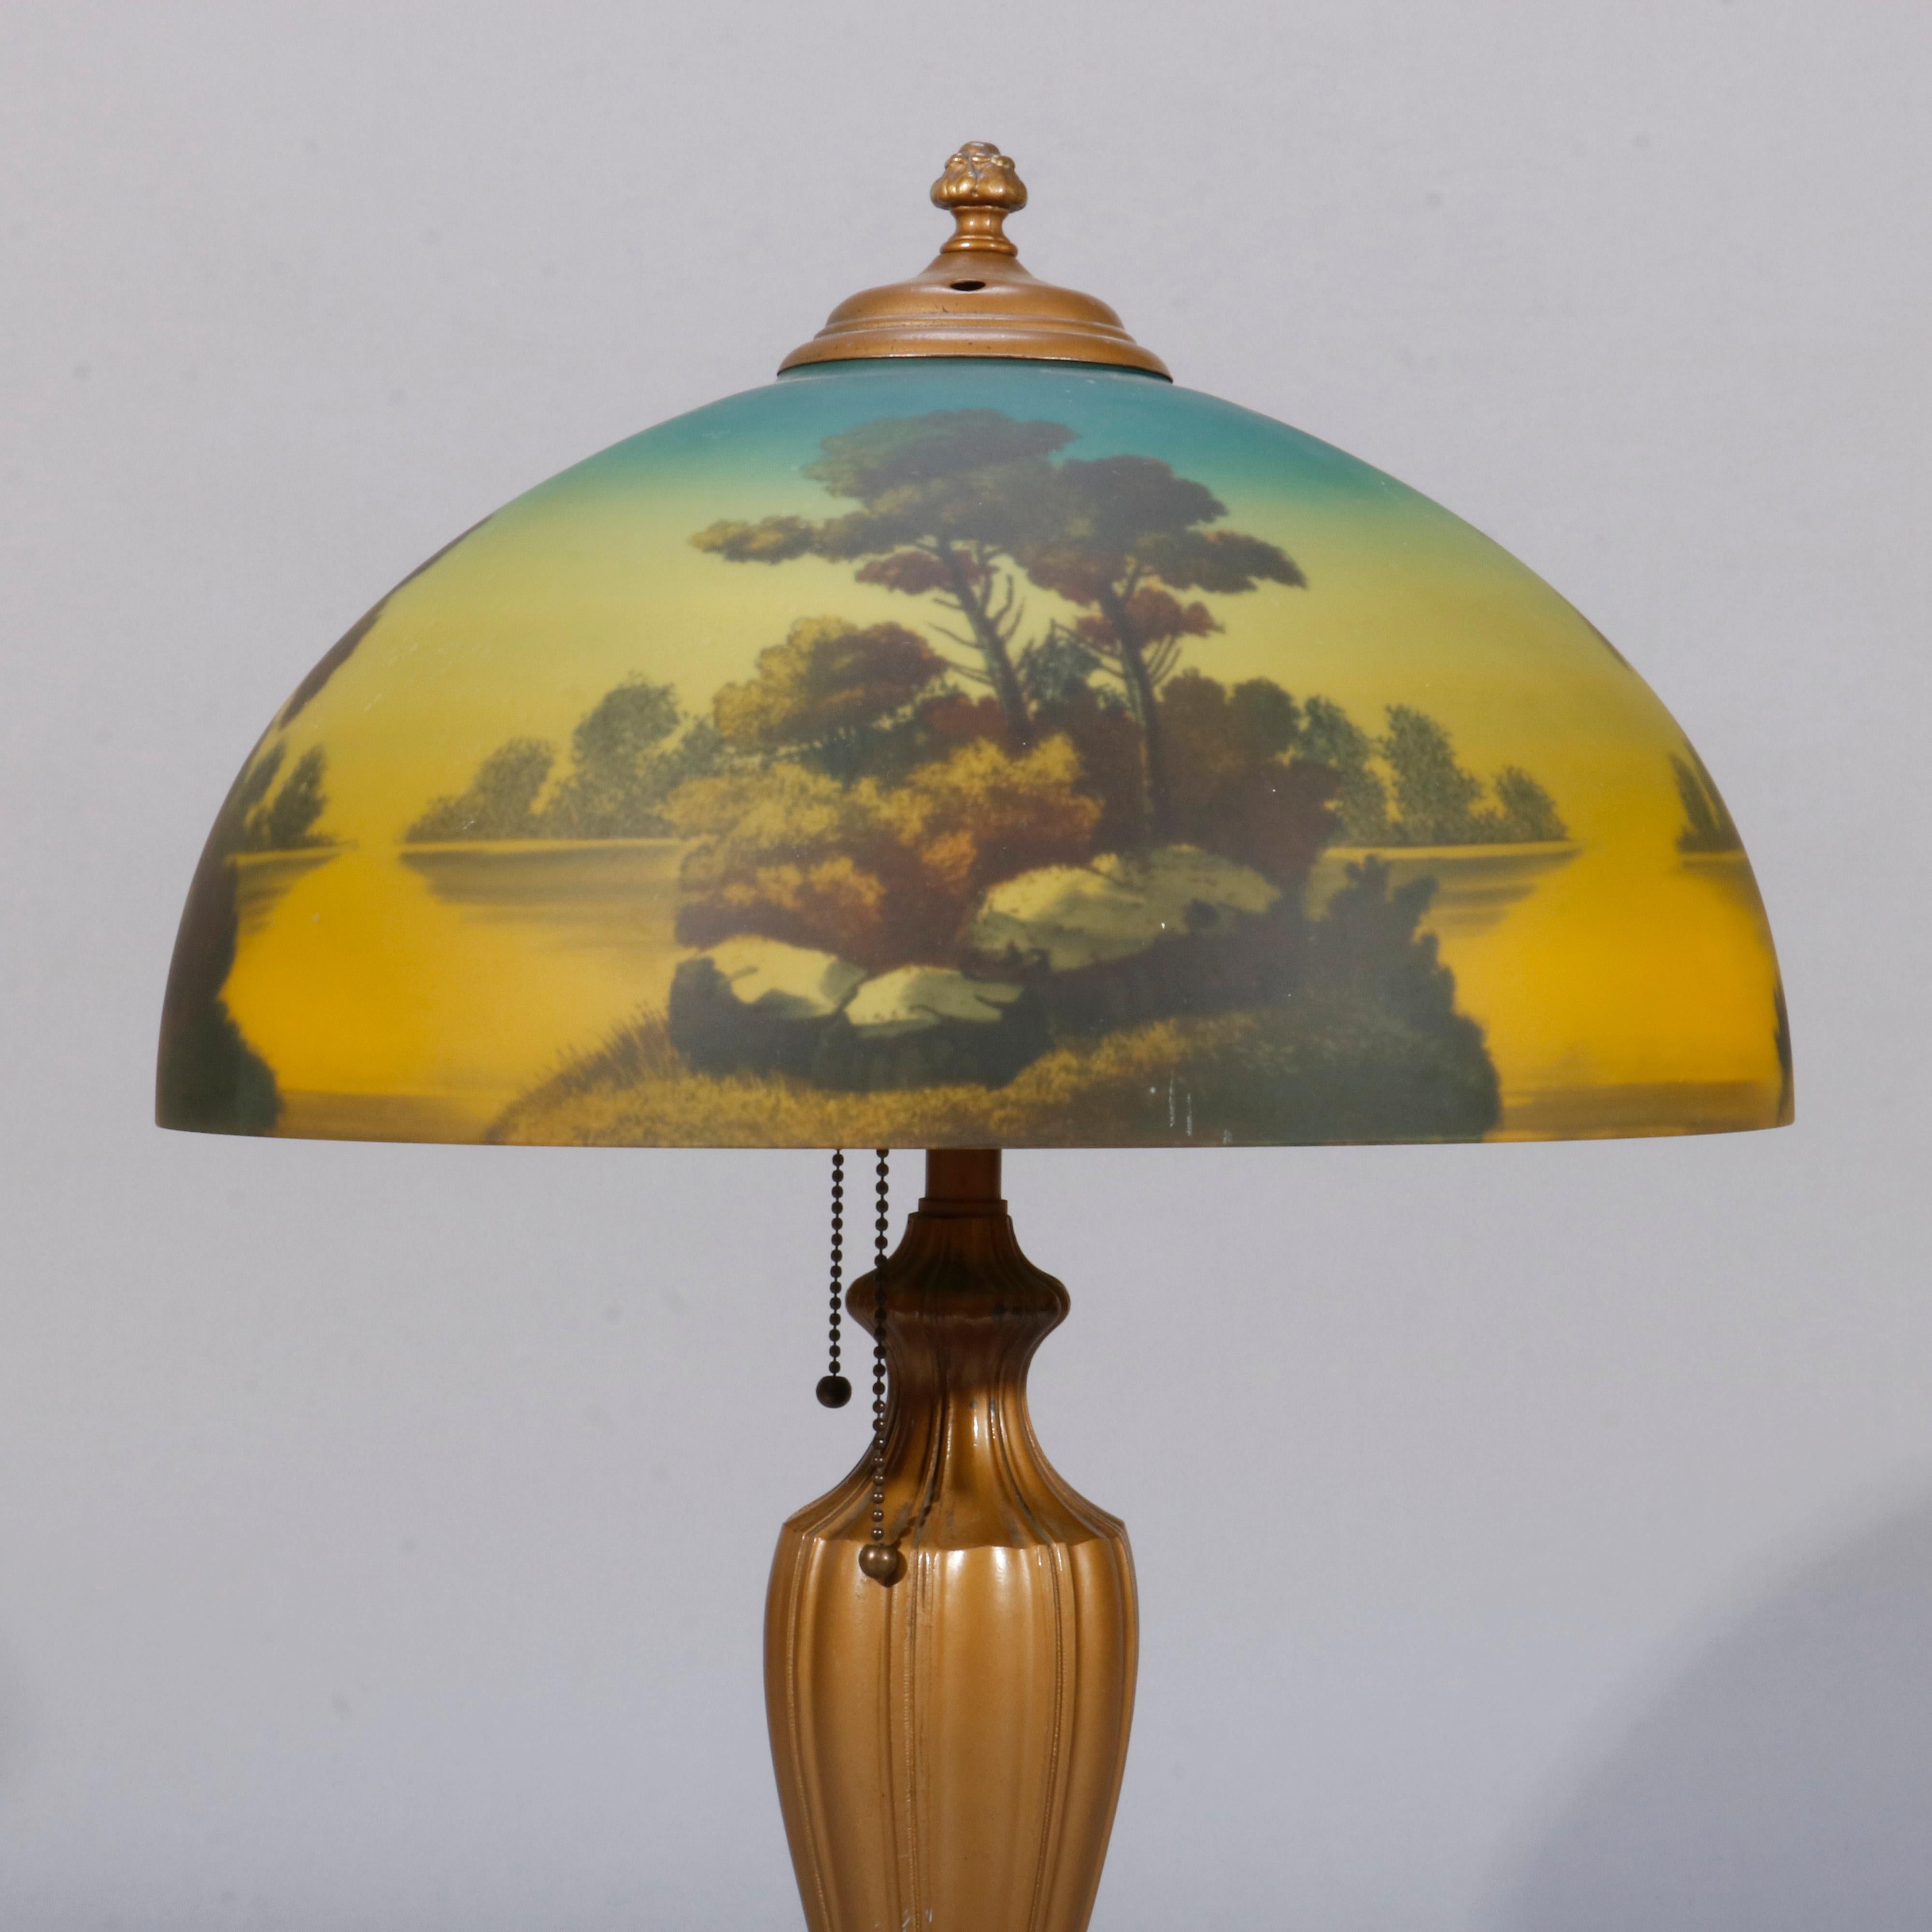 An antique Arts & Crafts Phoenix table lamp offers reverse painted domed shade with landscape lake scene surmounting double socket urn form base, circa 1920

Measures- 23